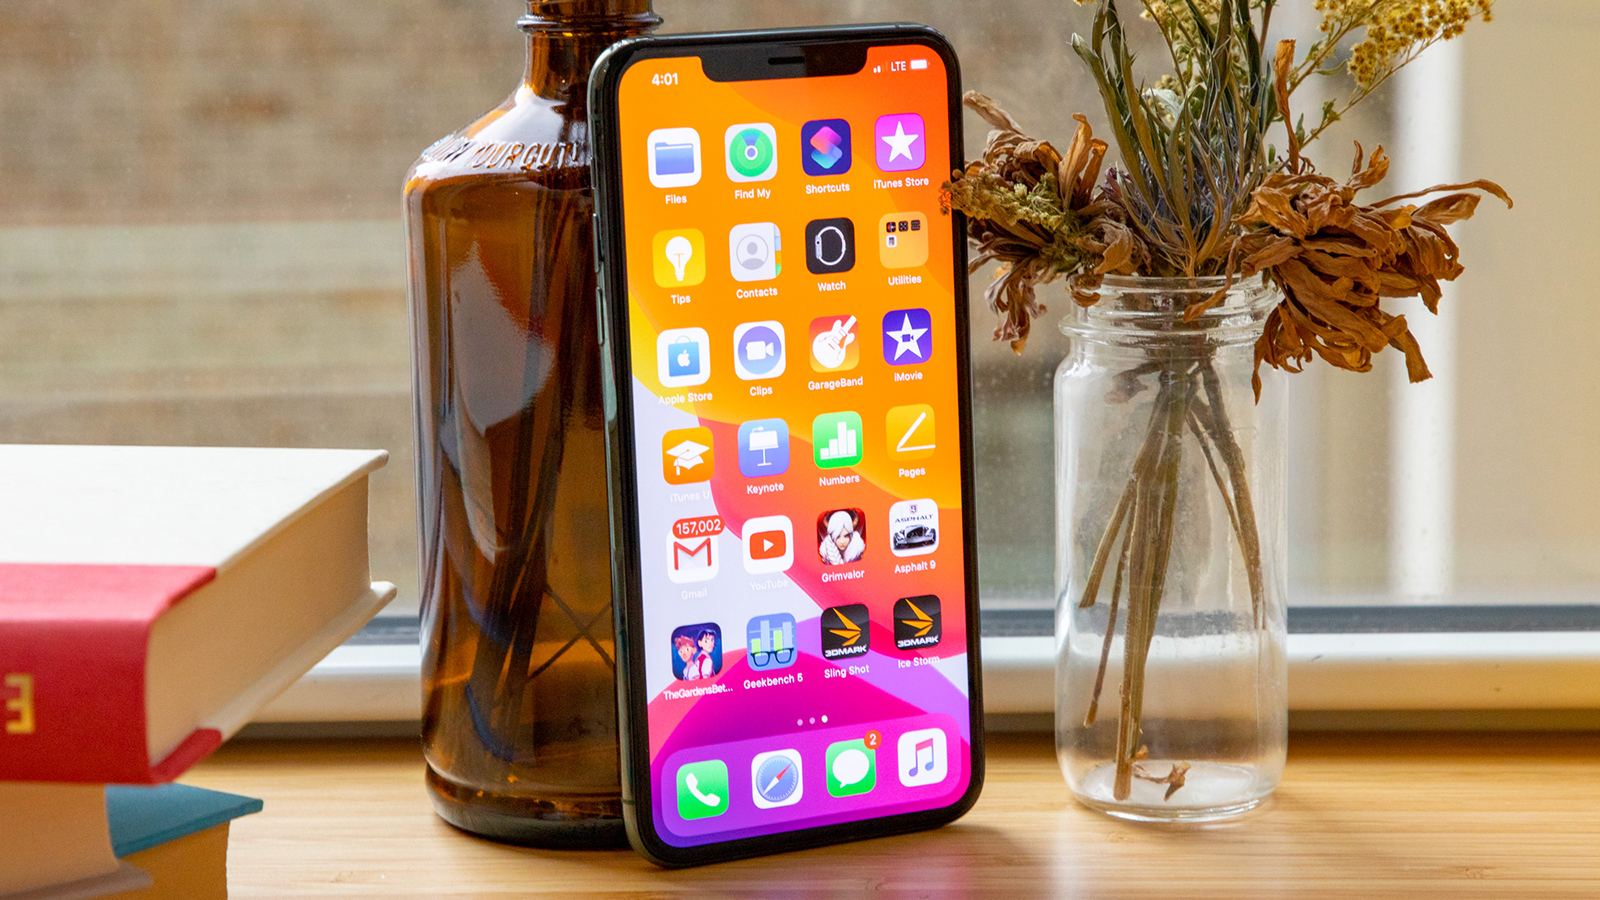 Apple supposedly utilizing less expensive iPhone battery parts to balance 5G cost